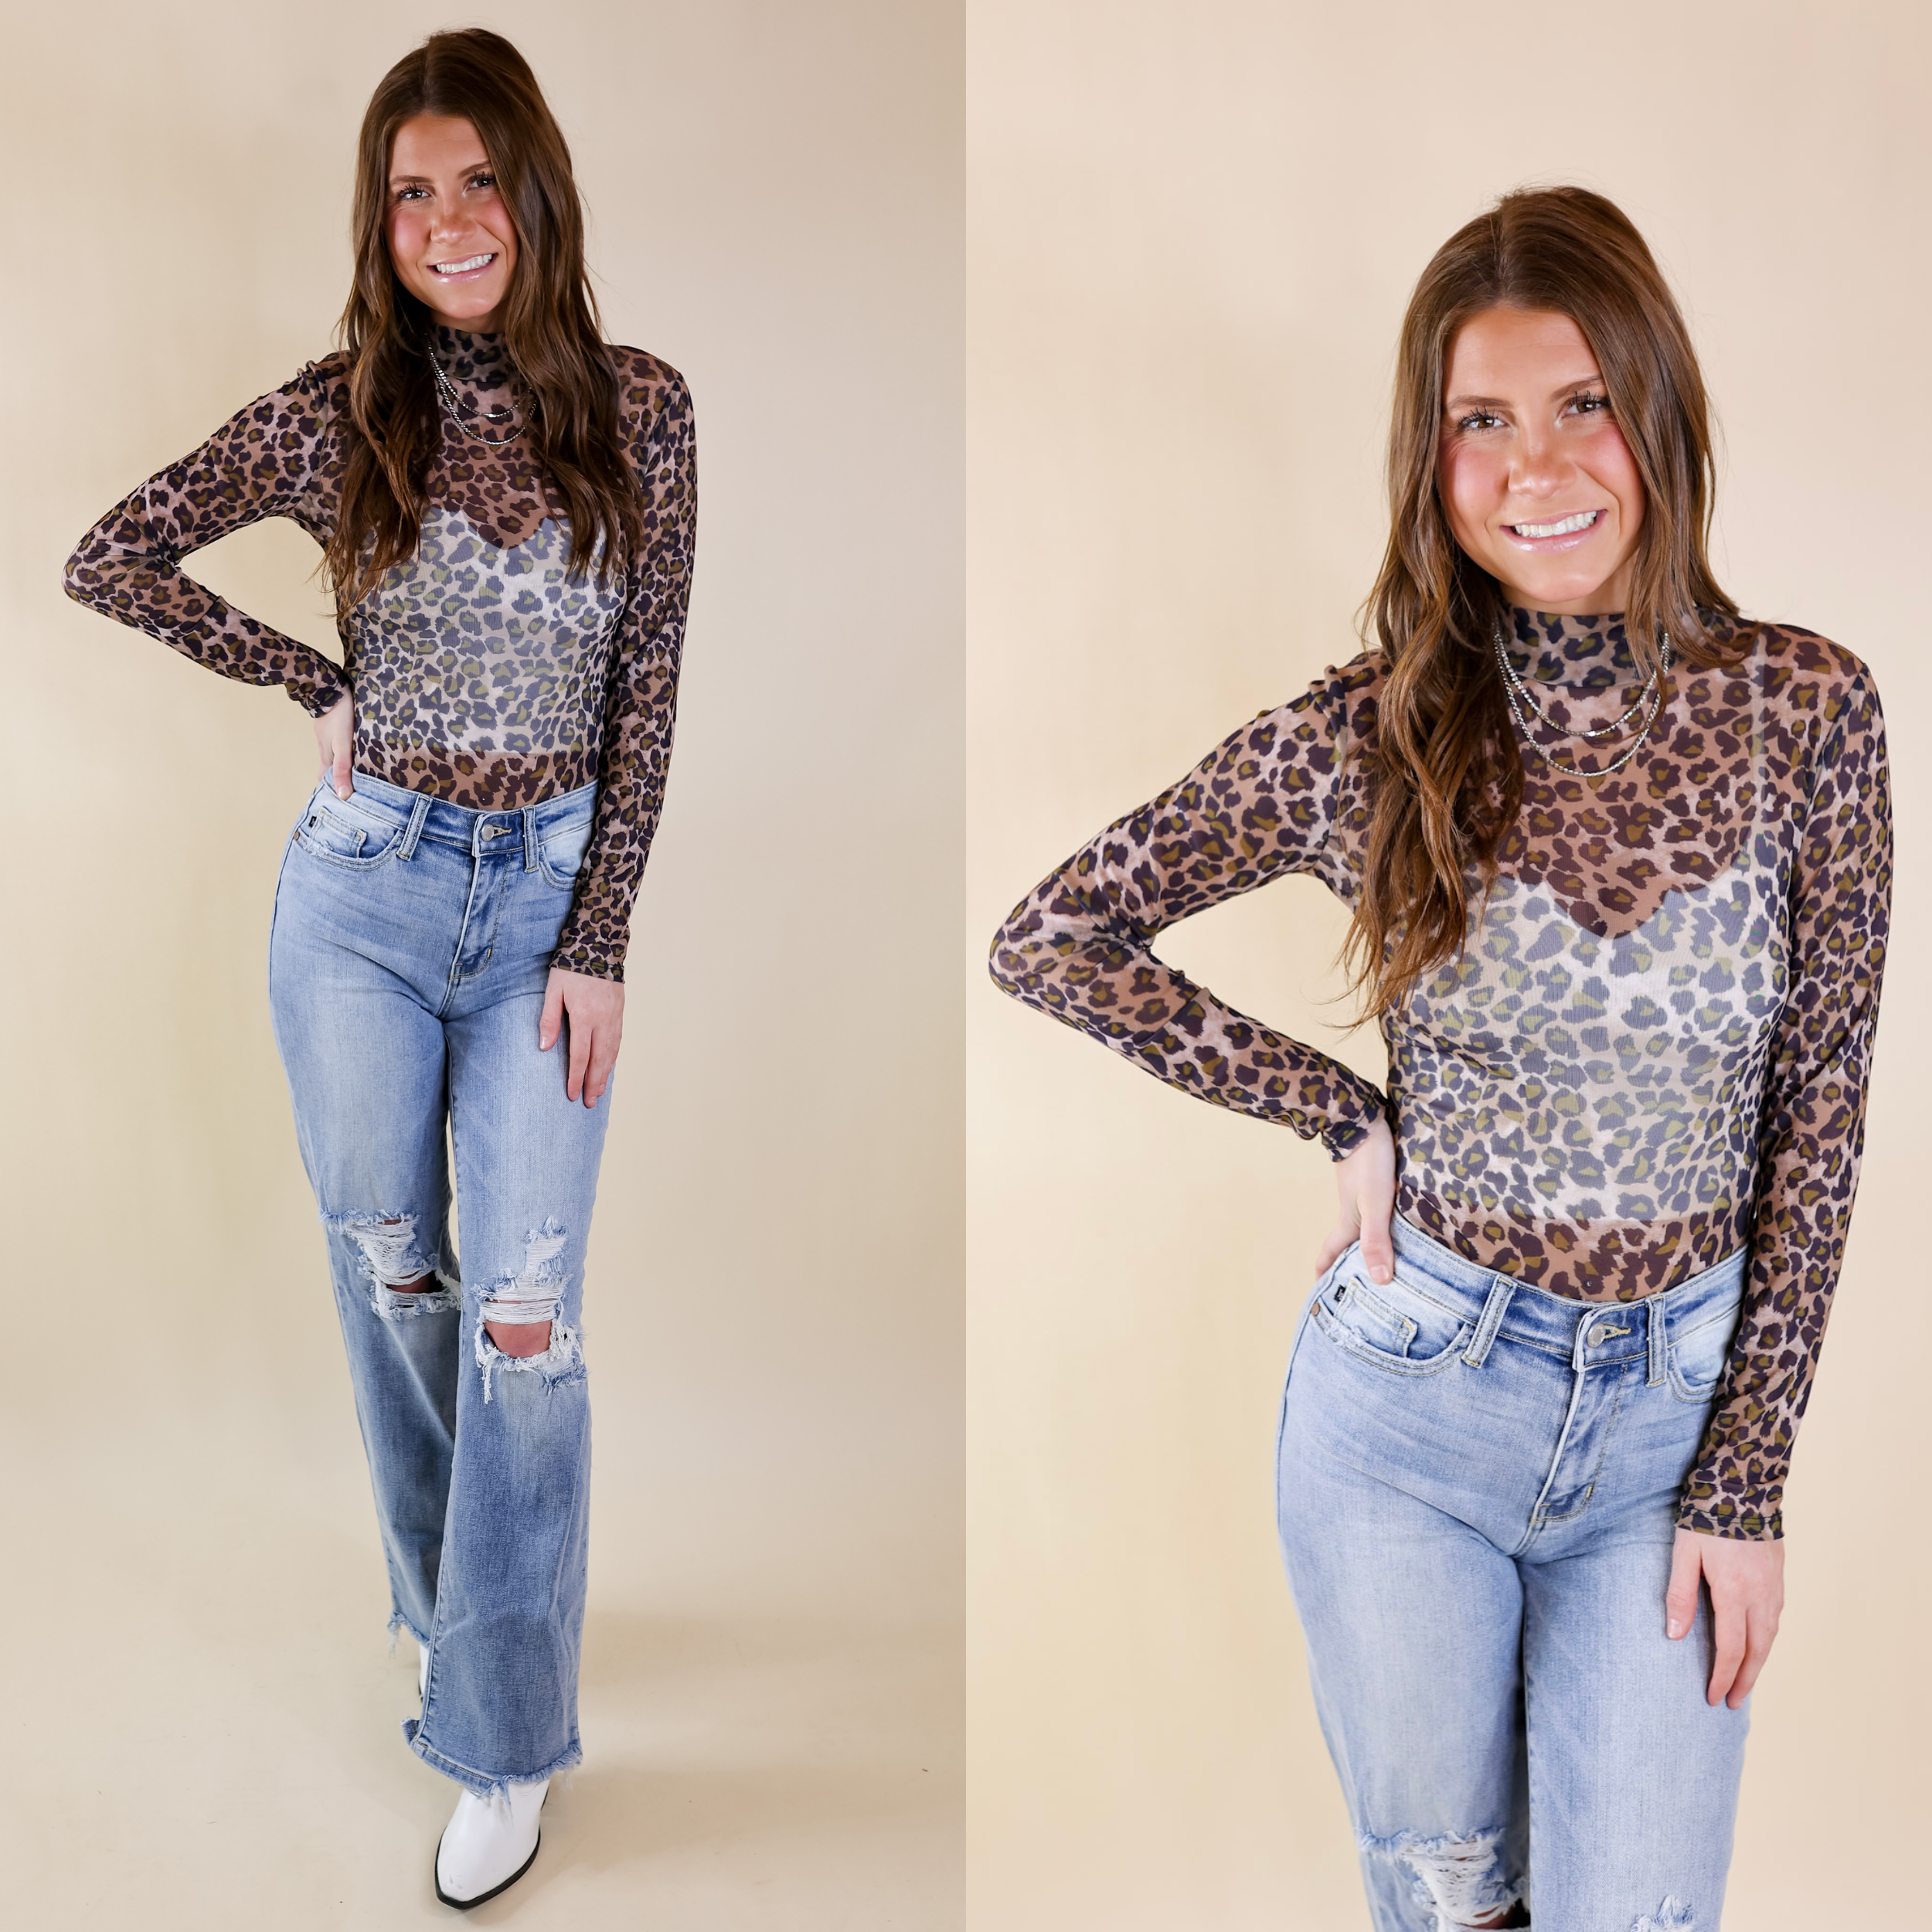 Try Your Luck Mesh Long Sleeve Bodysuit in Leopard Print - Giddy Up Glamour Boutique